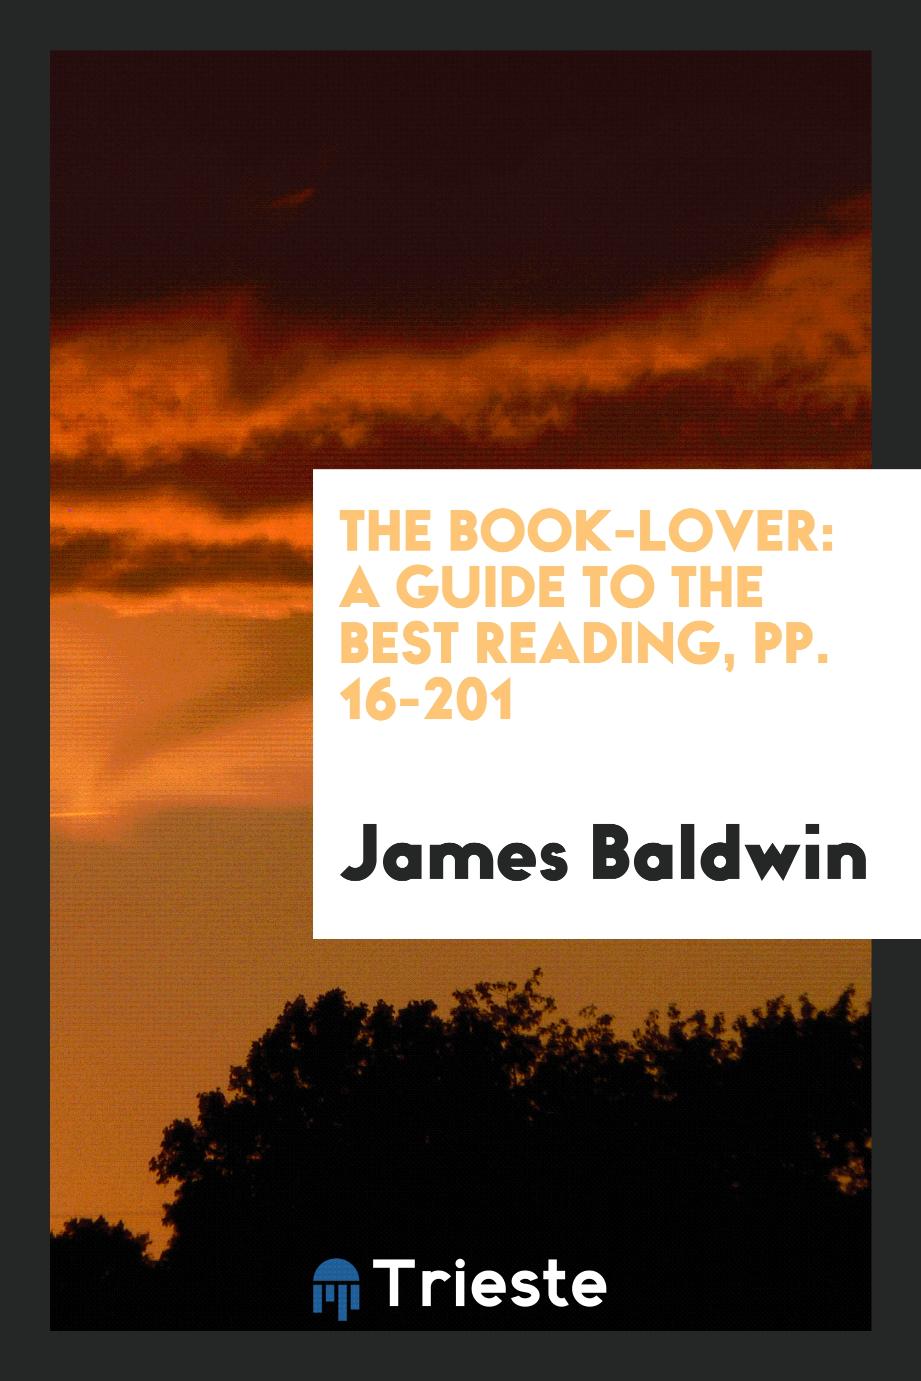 The Book-Lover: A Guide to the Best Reading, pp. 16-201